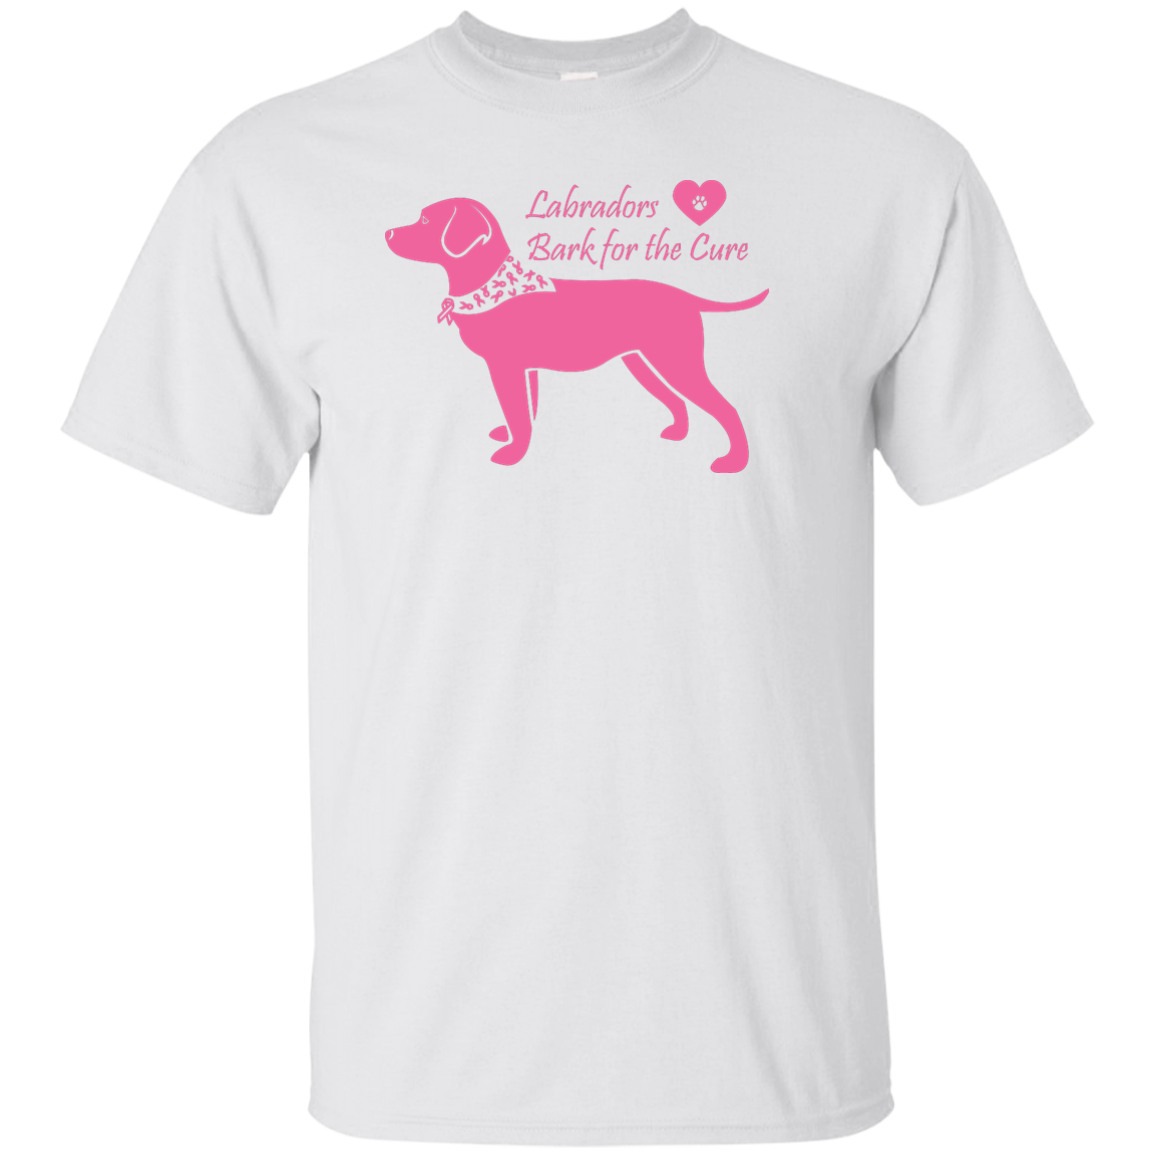 Labradors Bark for the Cure Shirts